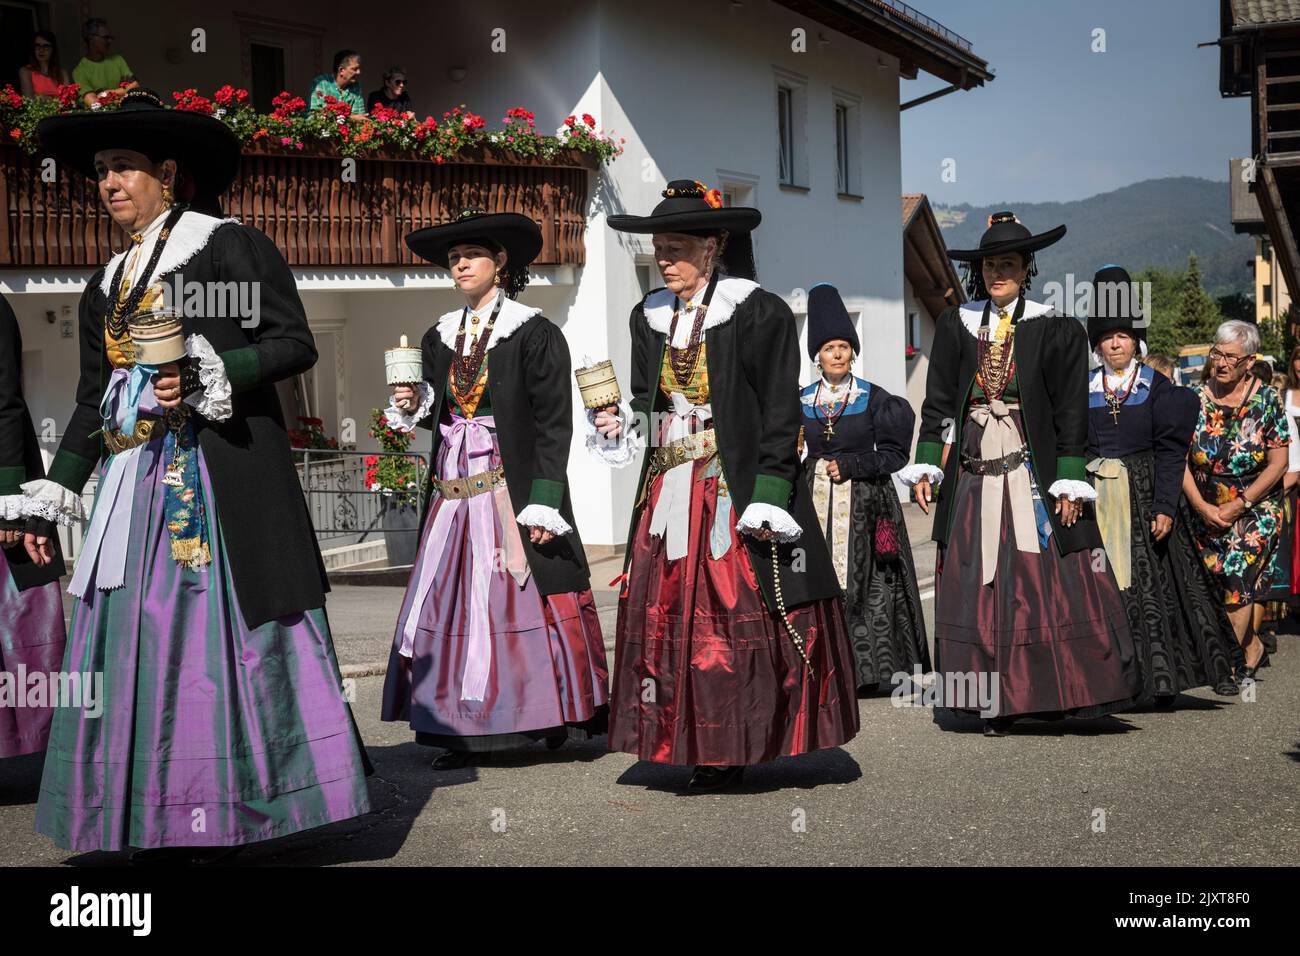 Women wearing traditional local period costume of wide brimmed hats and long colourful skirts, take part in a 'Corpus Christi' church procession in Or Stock Photo